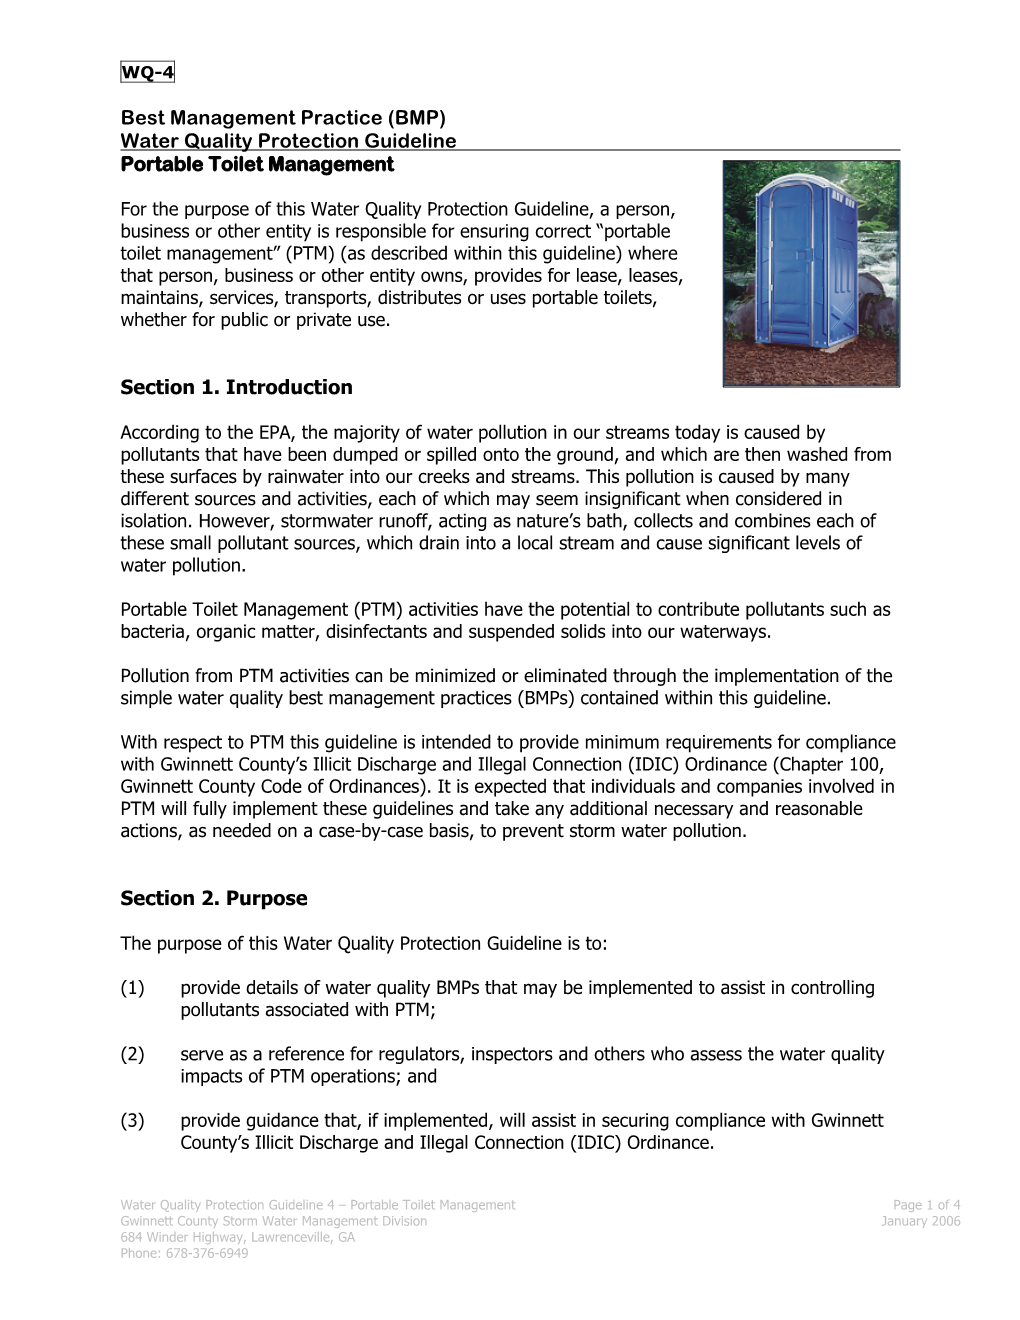 Water Quality Protection Guideline Portable Toilet Management